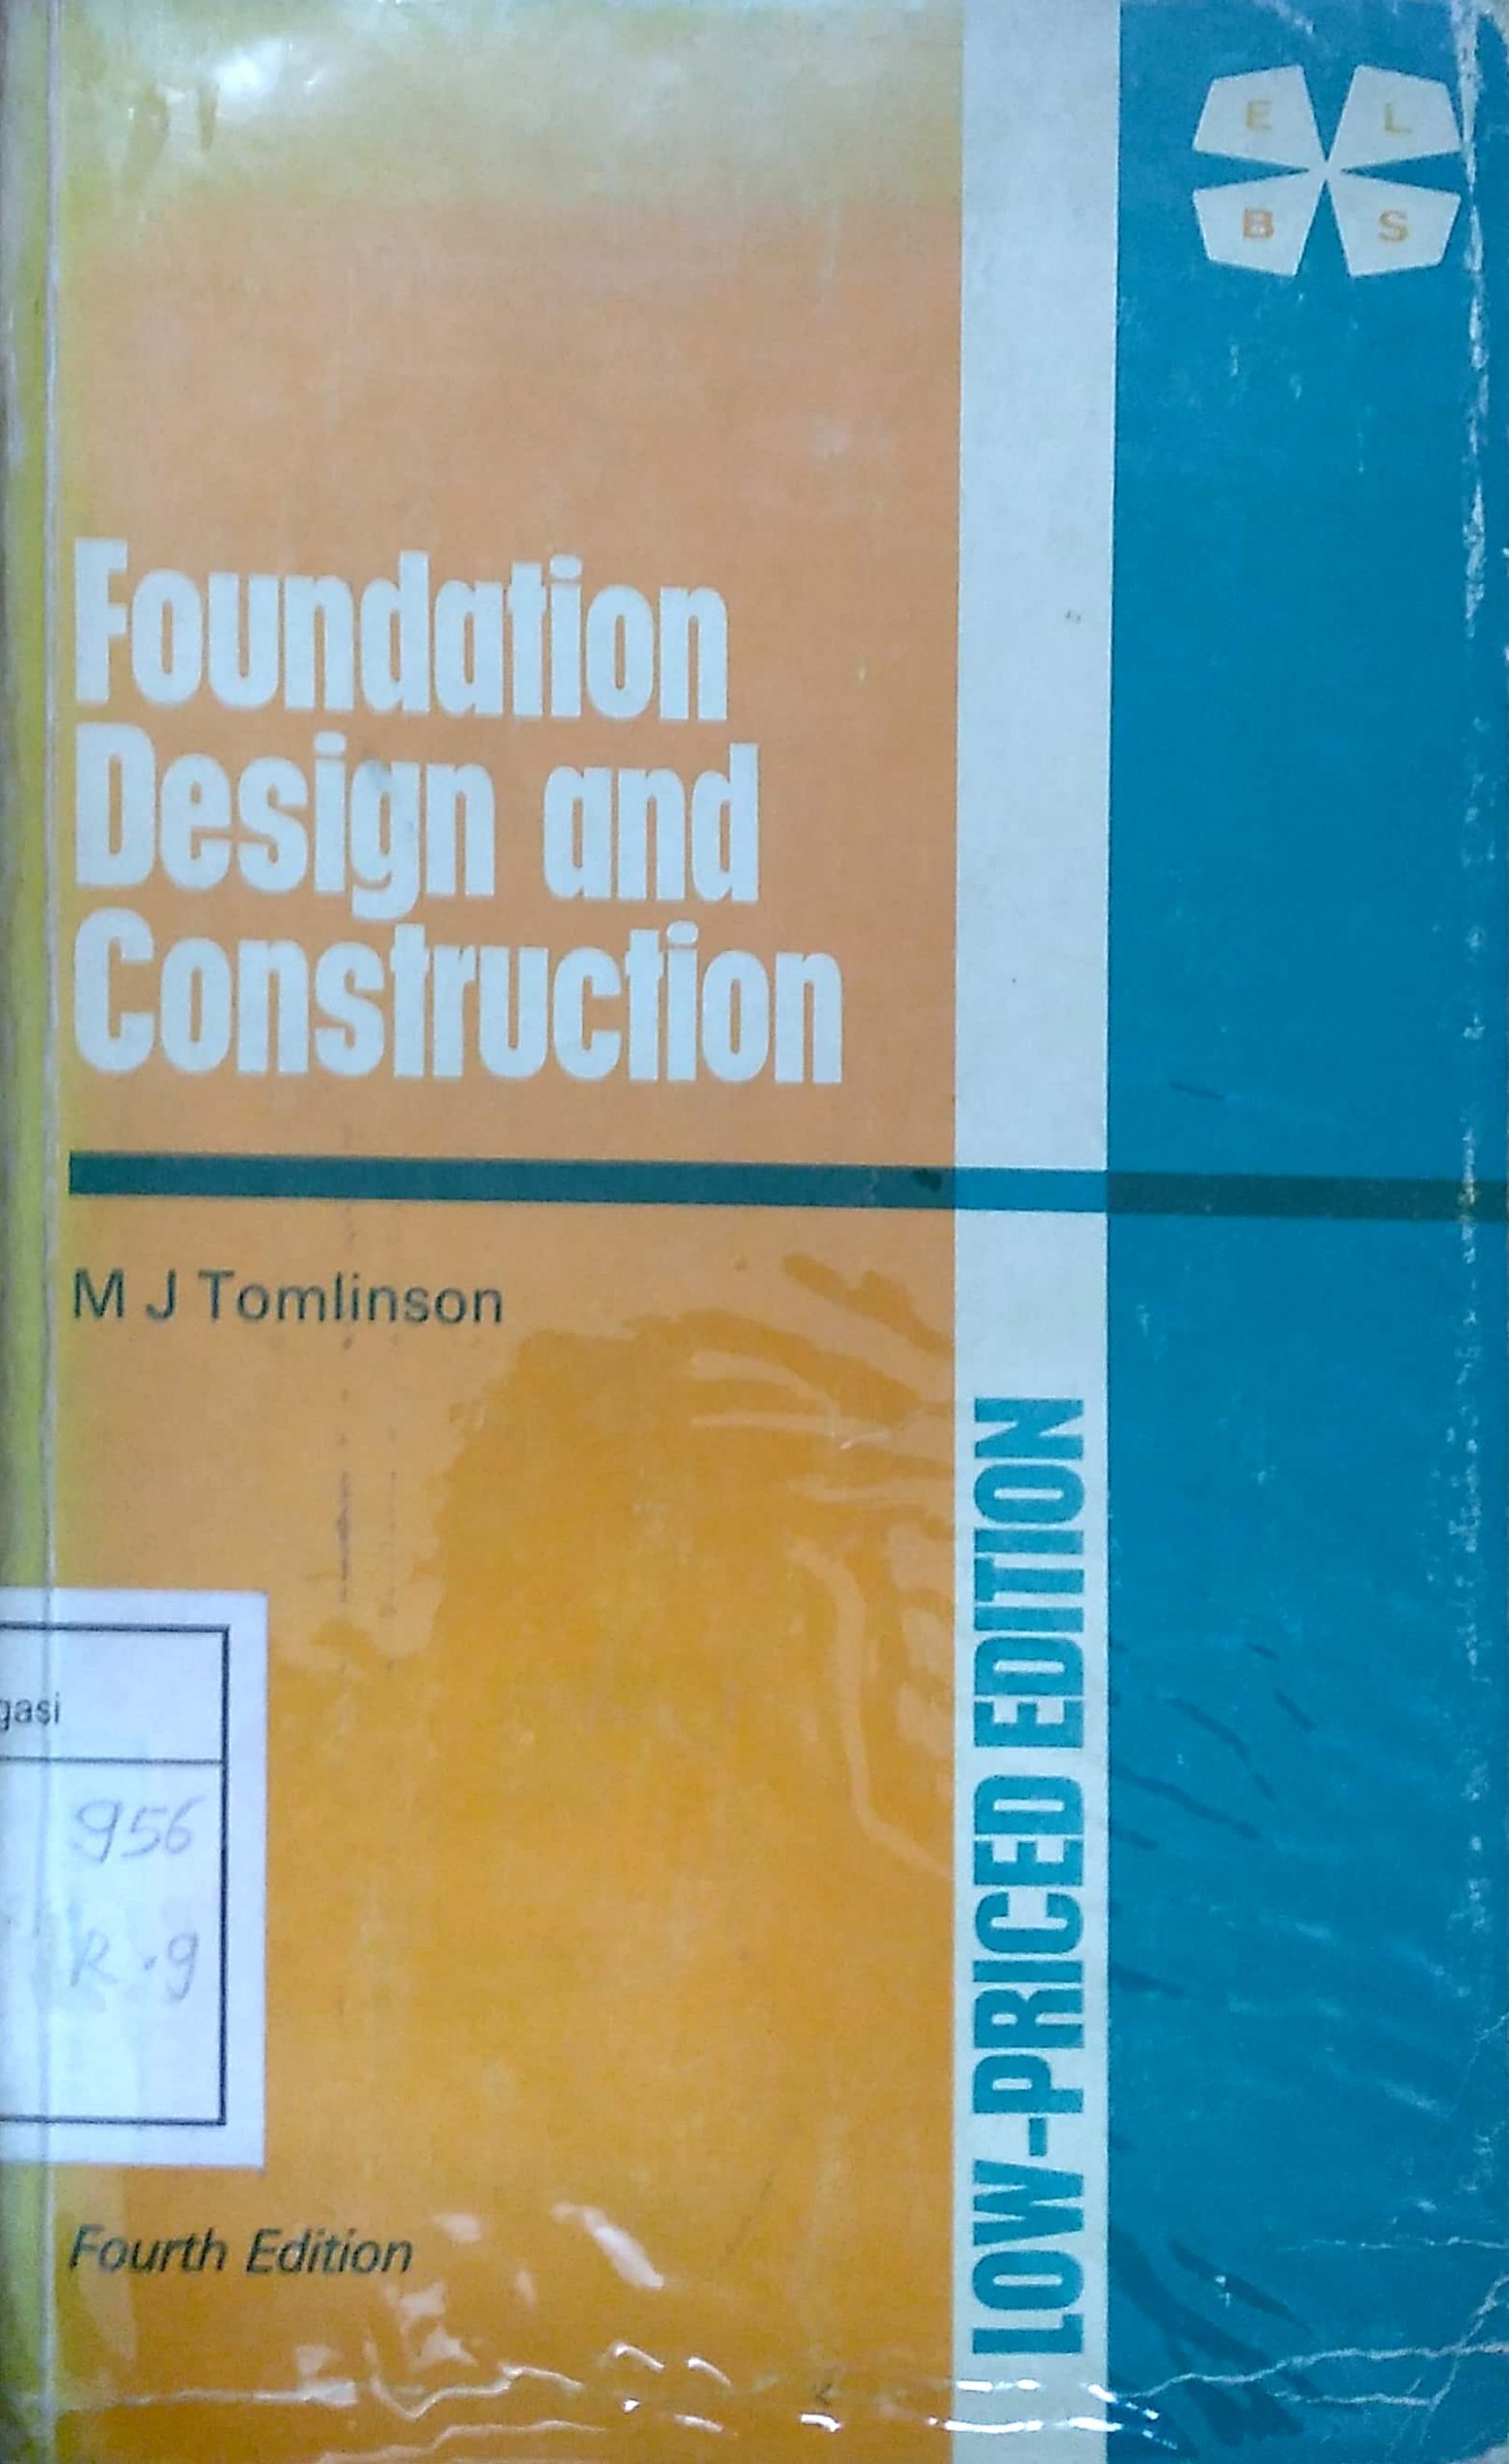 FOUNDATION DESIGN AND CONSTRUCTION